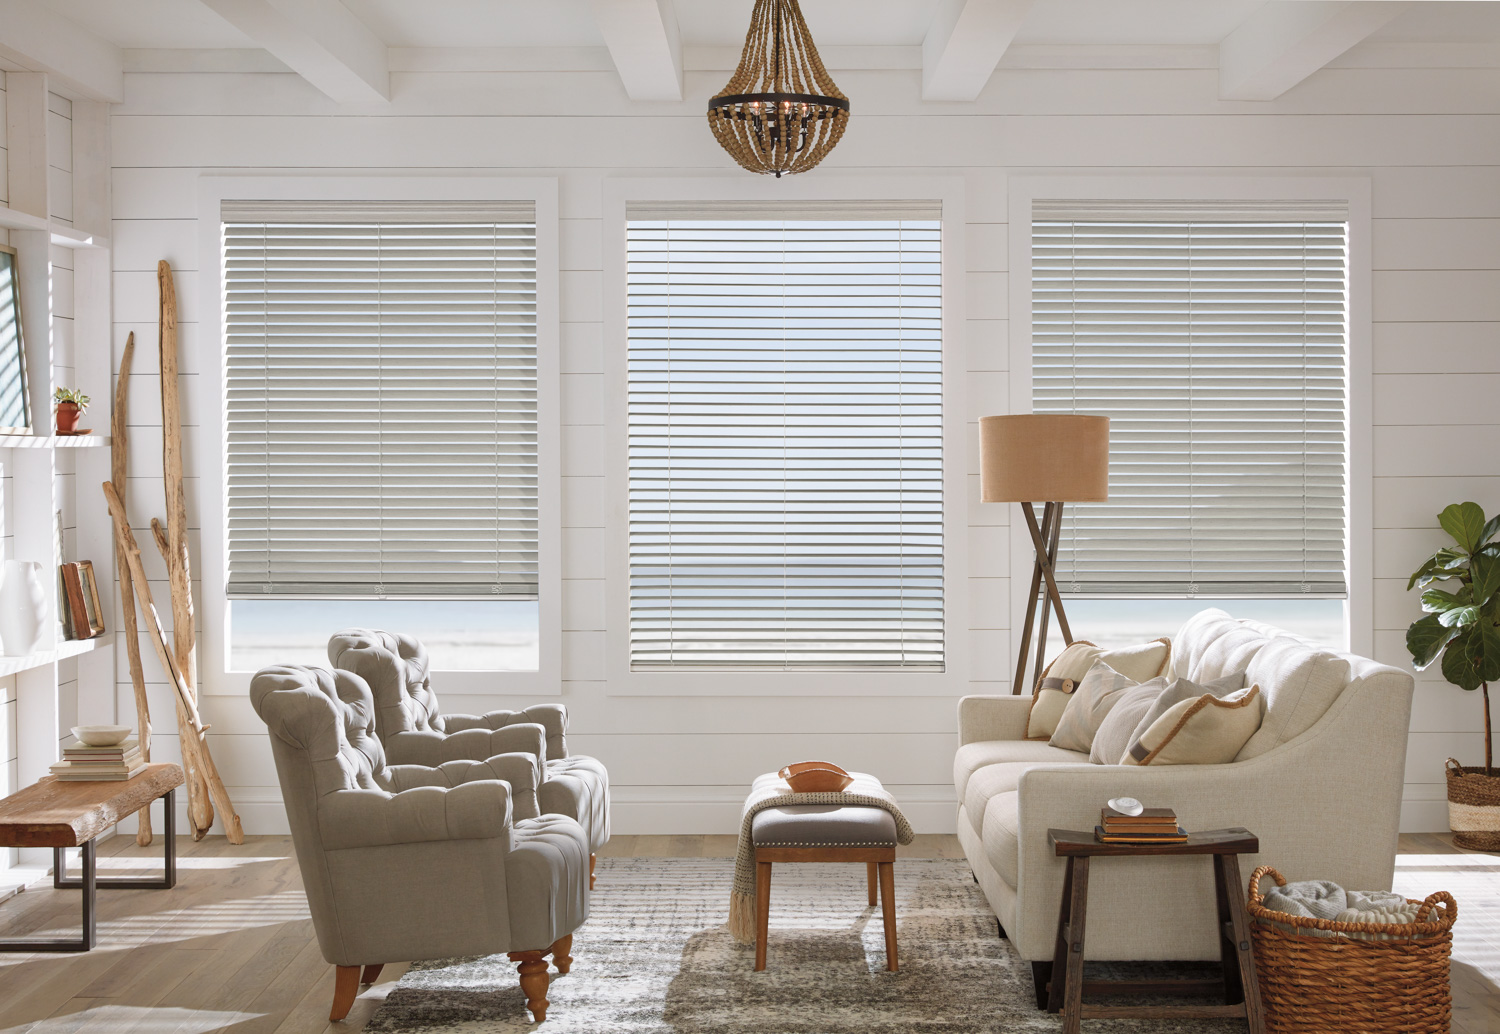 Living room with white walls, wooden floors, and Hunter Douglas Modern Precious Metals® Mini Blinds.